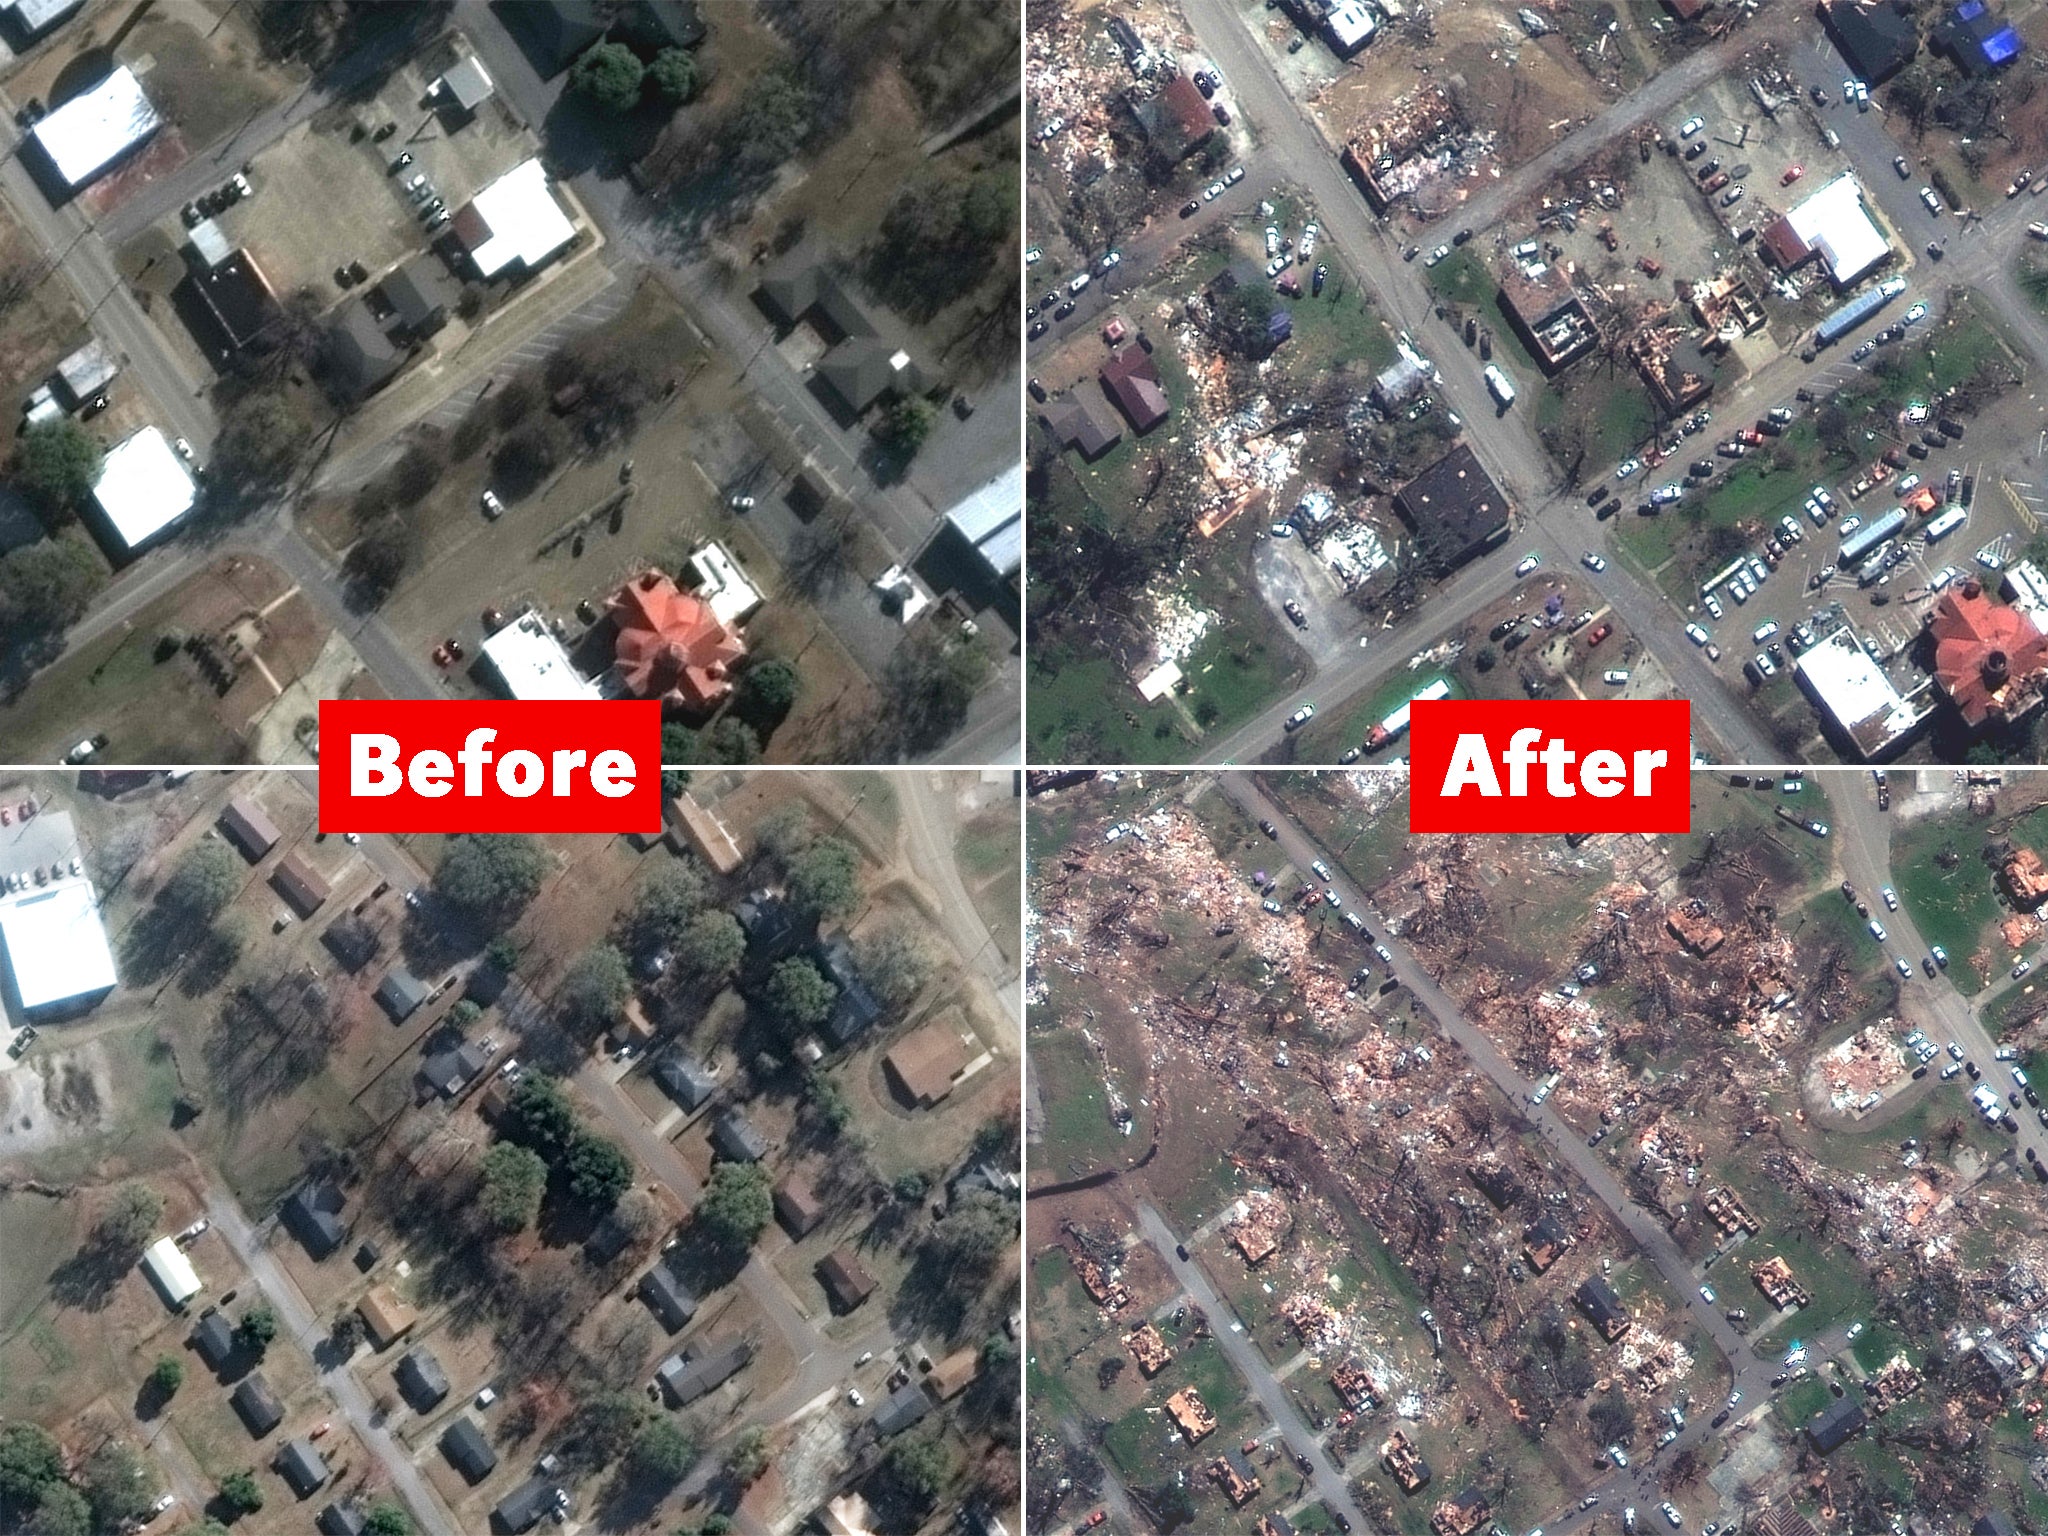 Before and after images show the devastation in the town of Rolling Fork, Mississippi after a tornado on Friday night